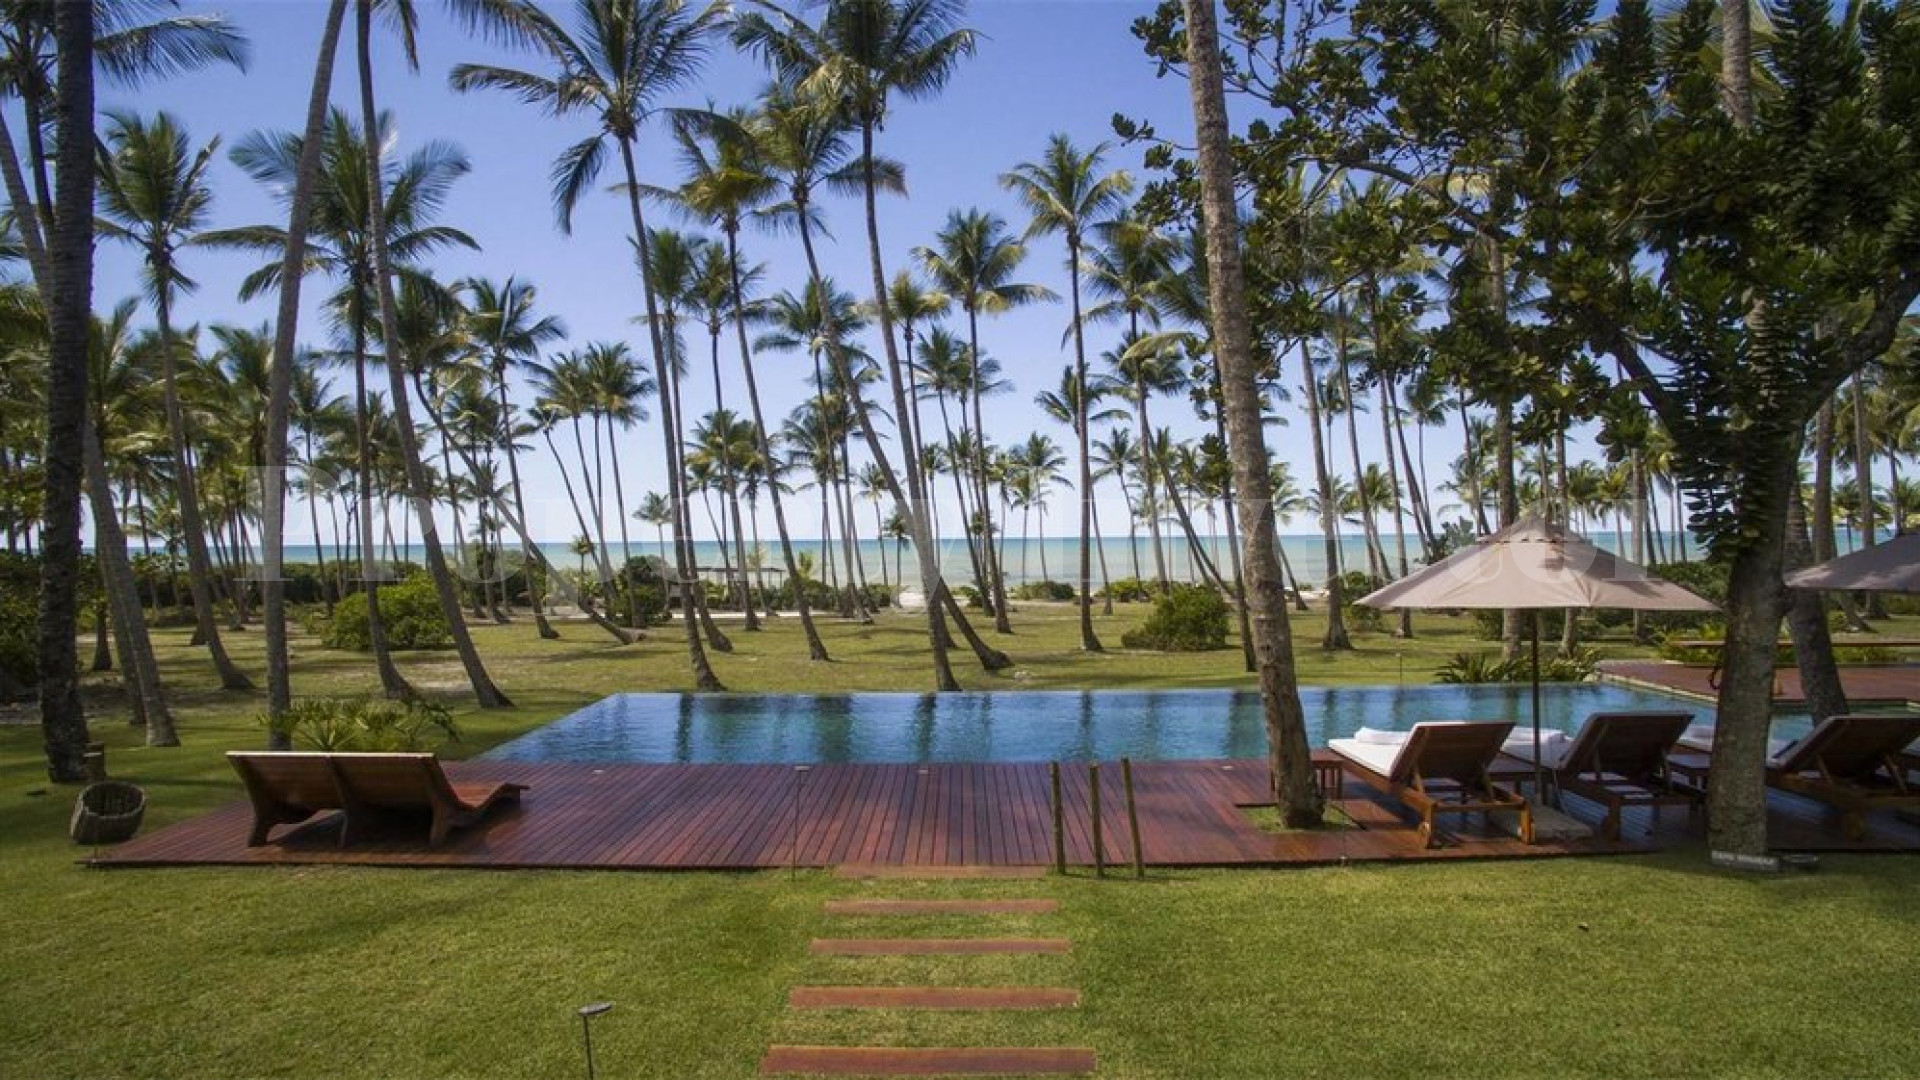 Jaw Dropping 6 Bedroom Luxury Beachfront Villa with 100 Metres of Beach Frontage for Sale in Trancoso, Brazil